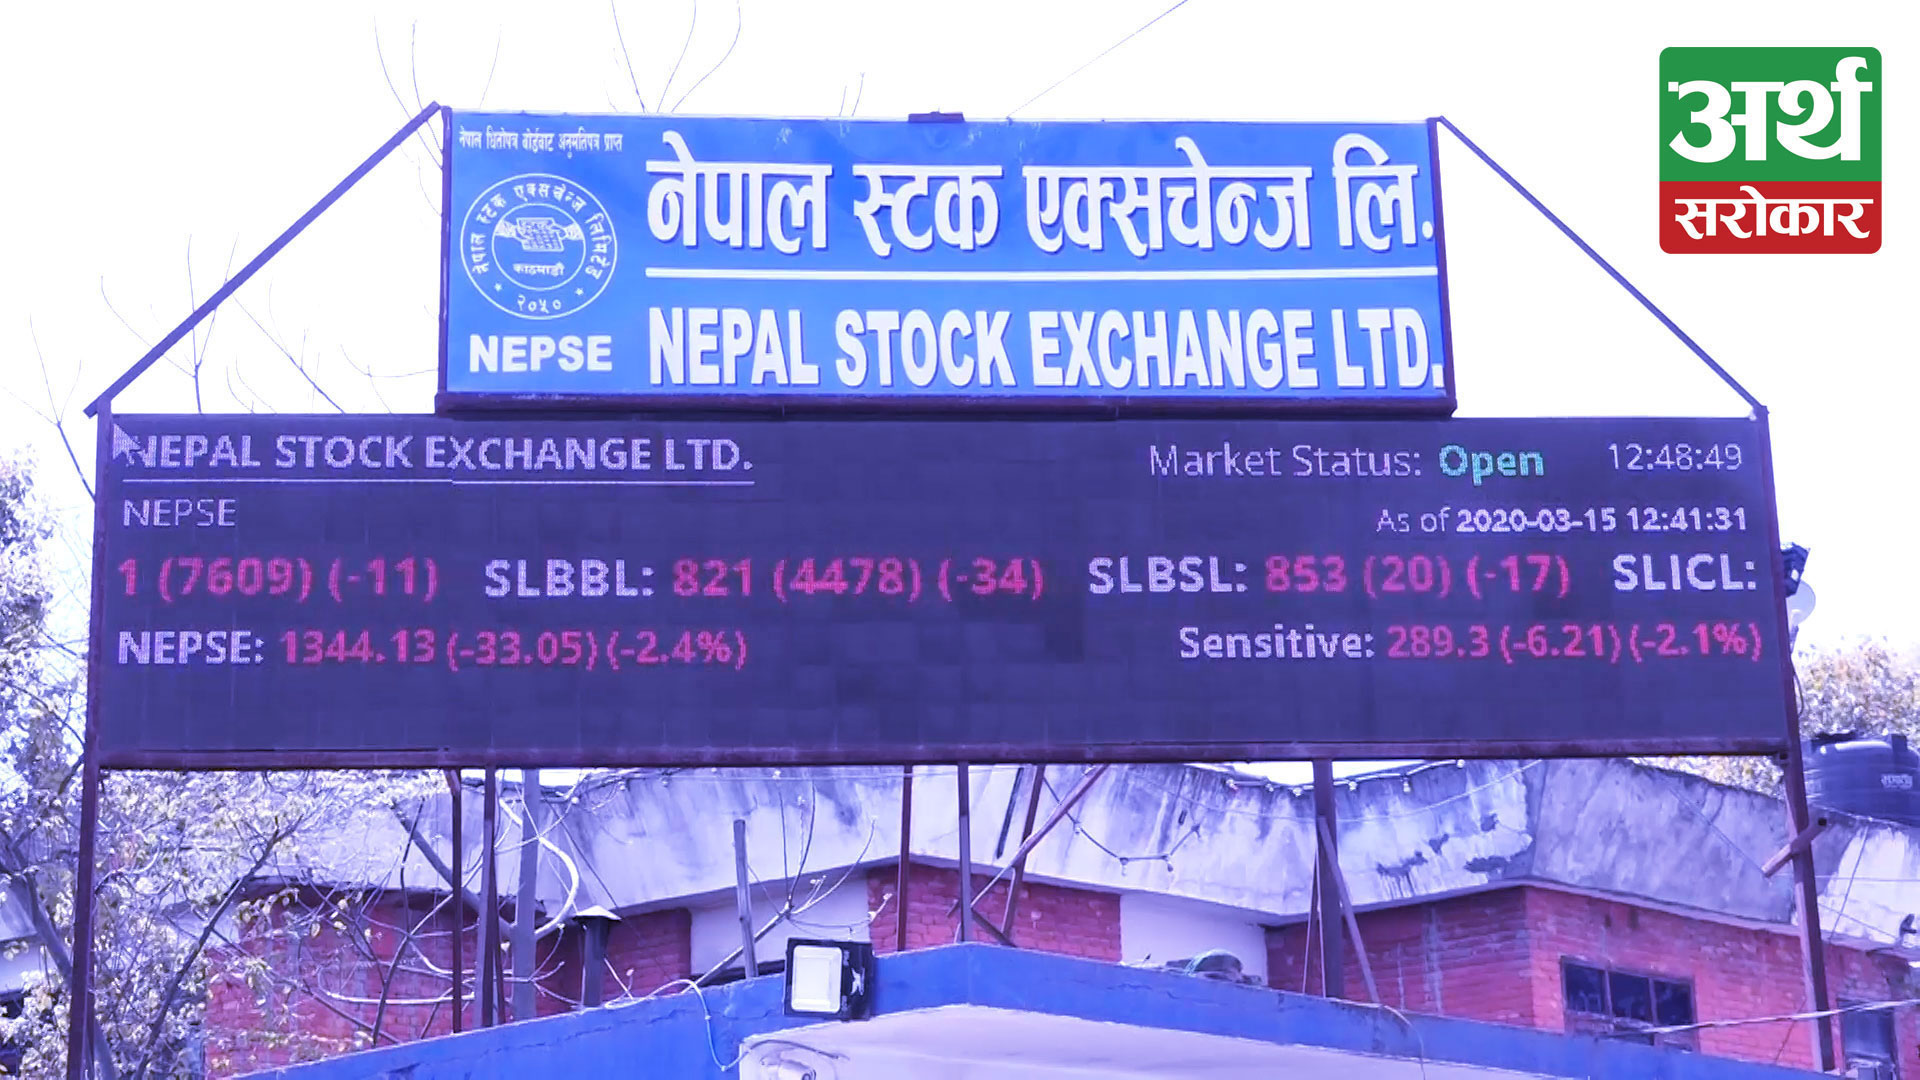 The enthusiasm for the transaction amount remains same although NEPSE index has decreased